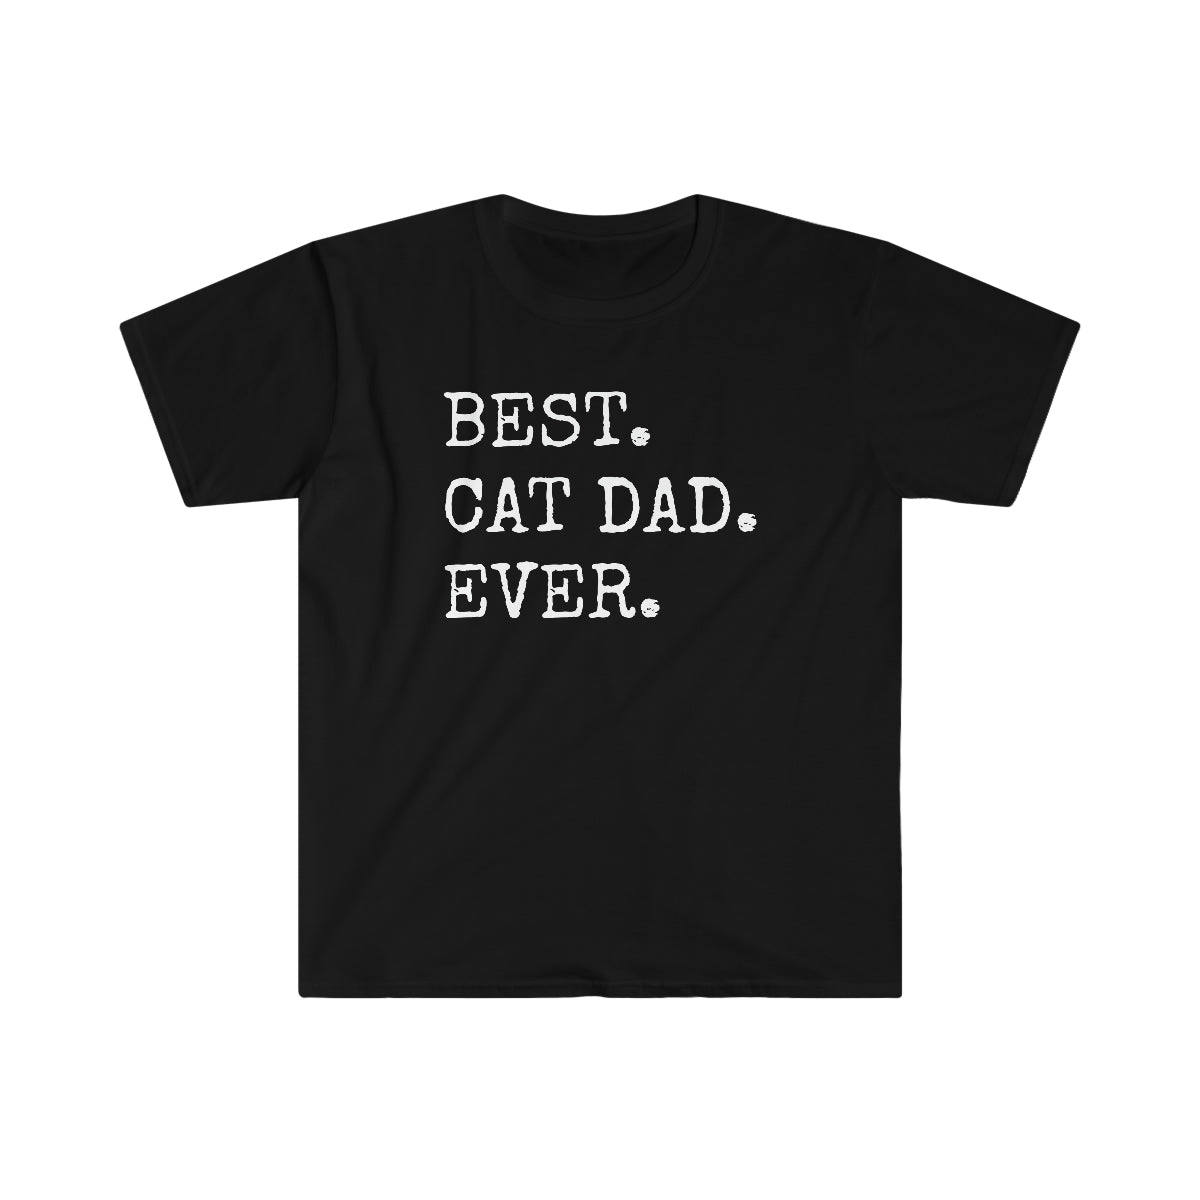 Best Cat Dad Ever - Cat Dad Tee - Unisex Softstyle T-Shirt